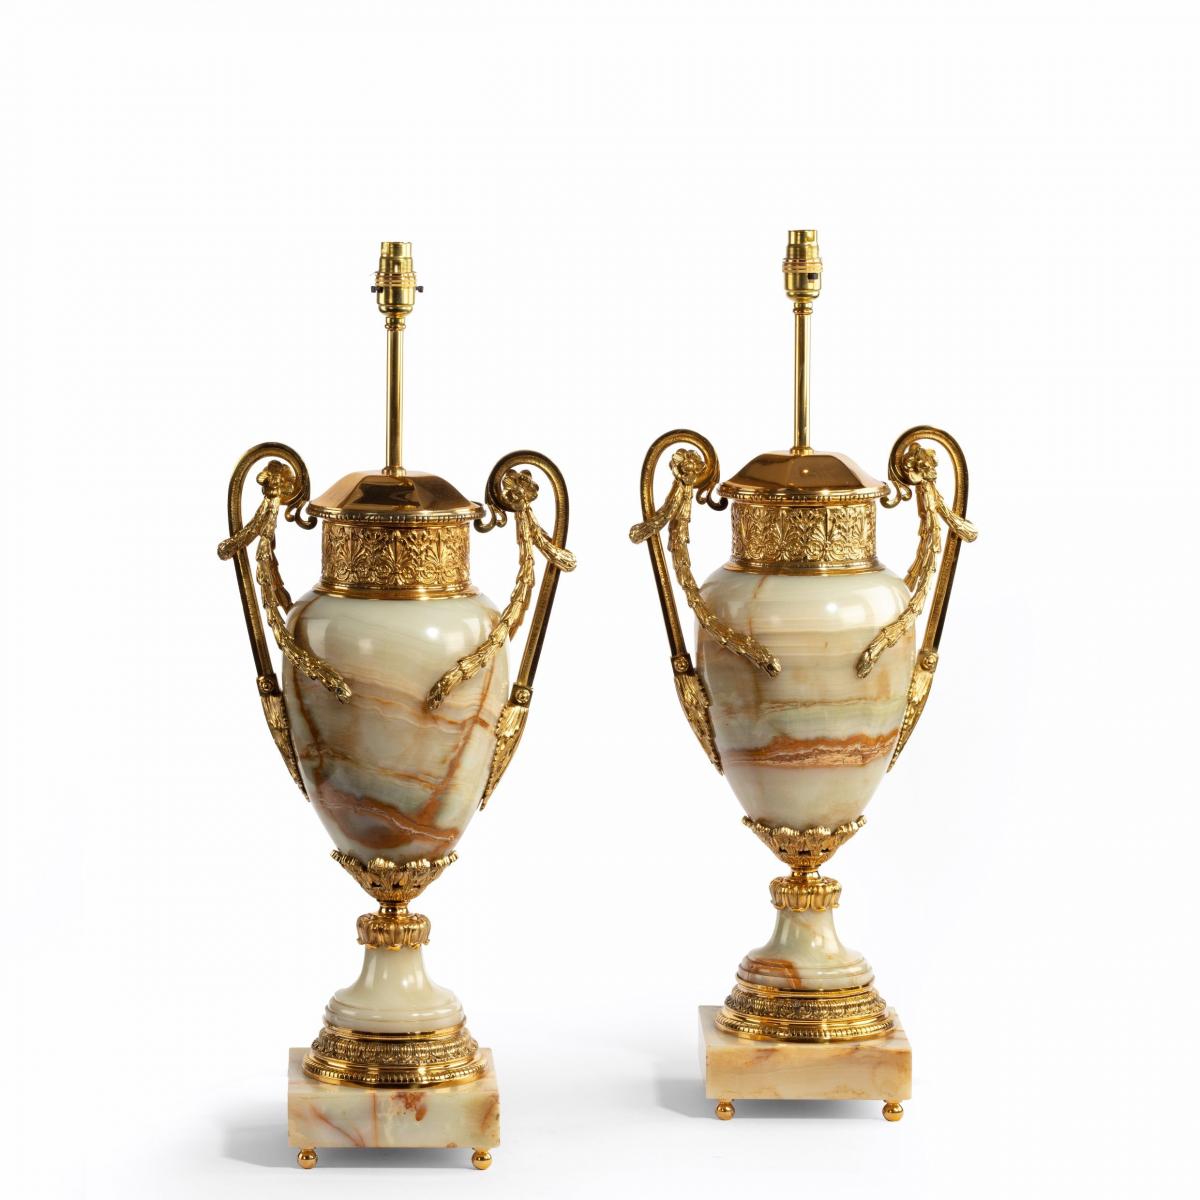 French onyx and ormolu lamps